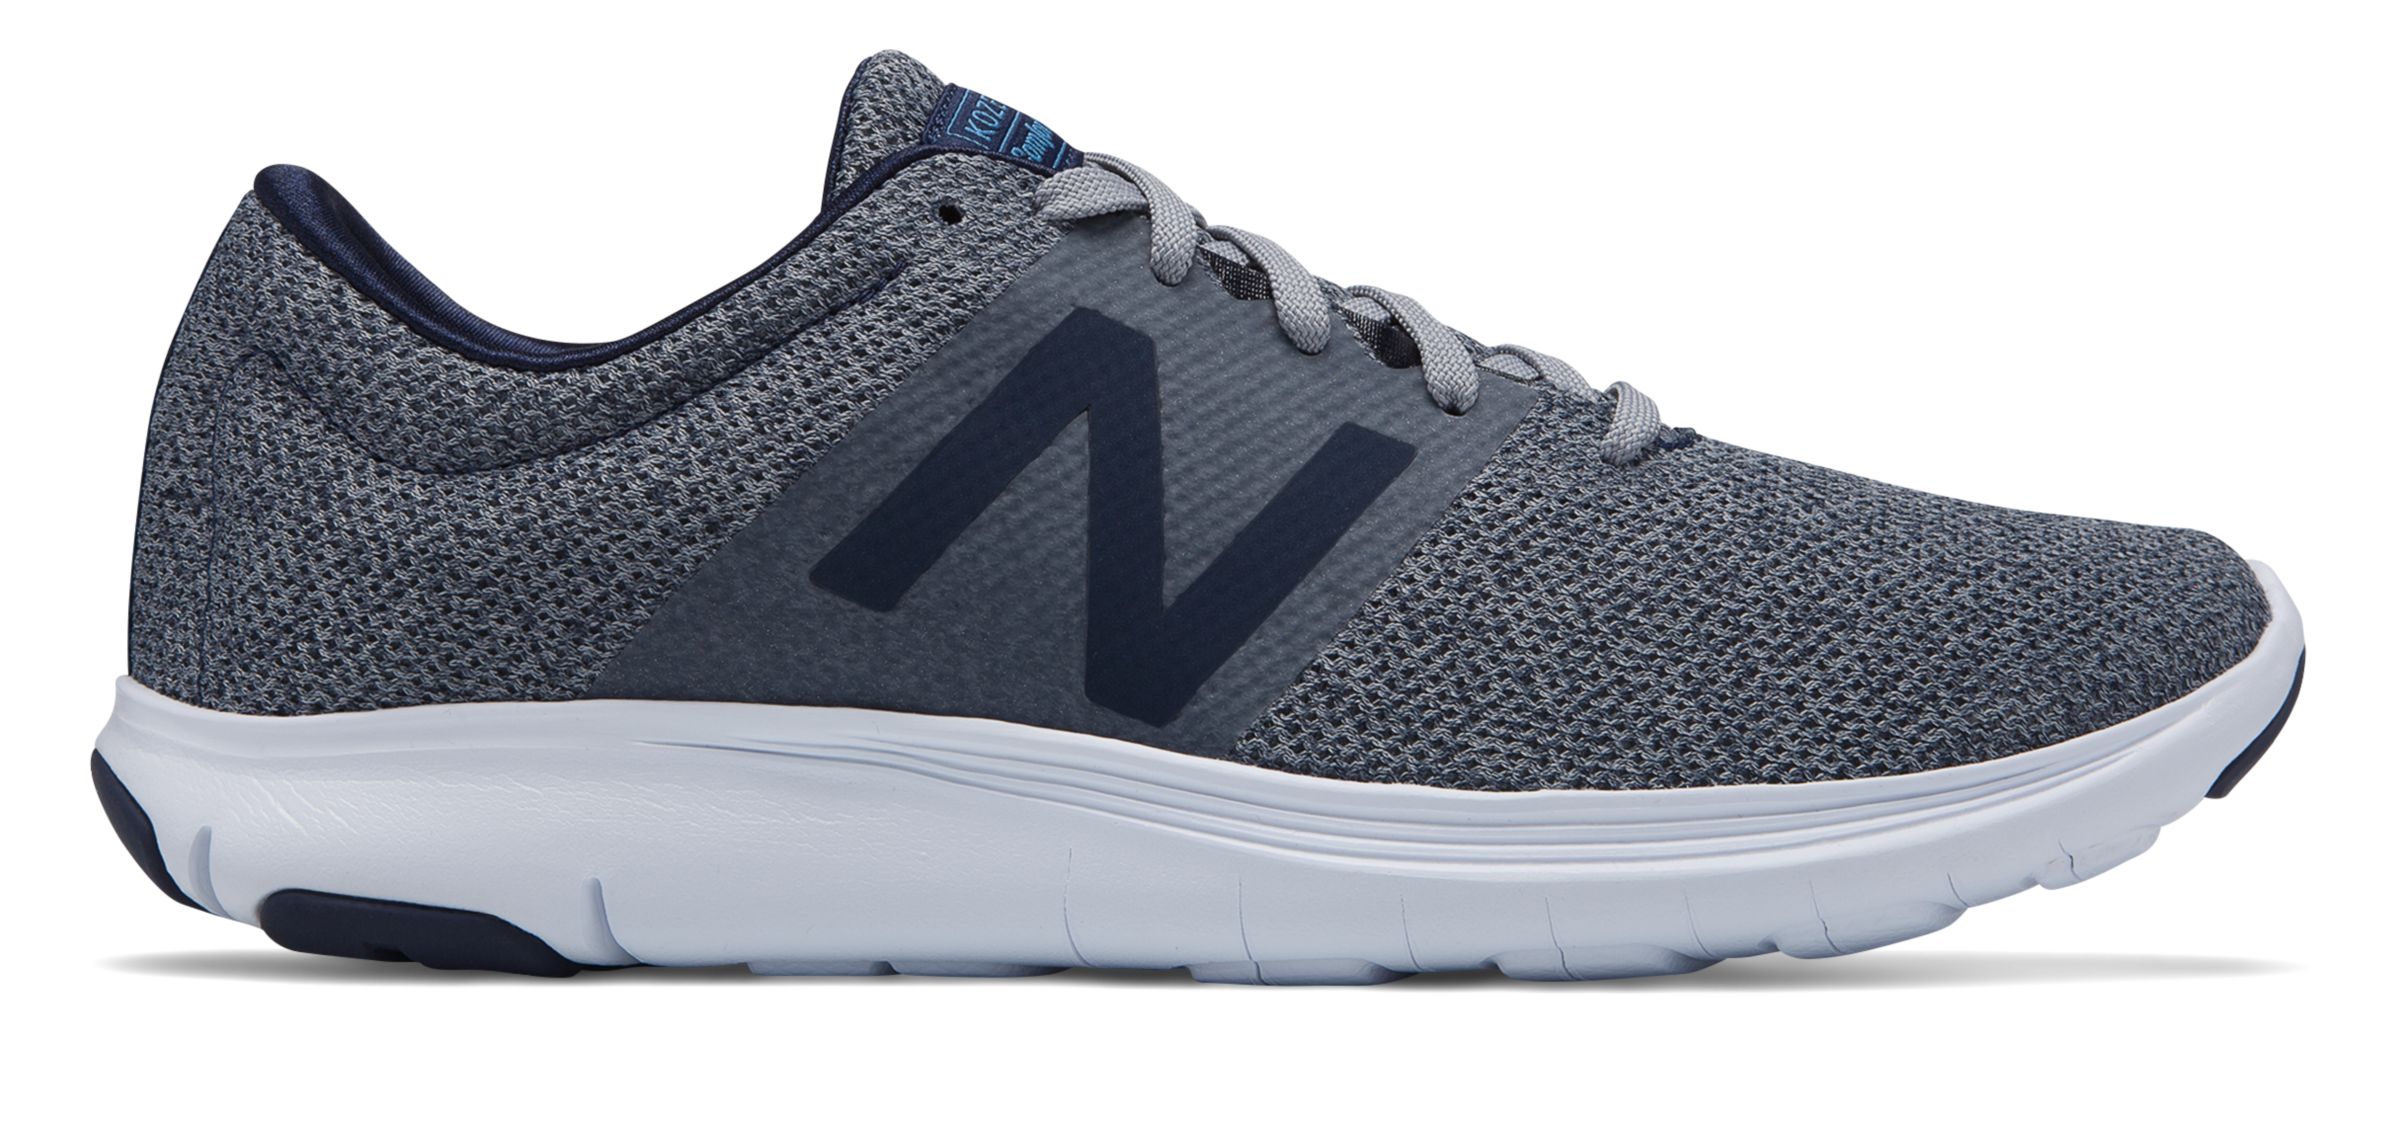 New Balance MKOZE on Sale - Discounts Up to 54% Off on MKOZERS1 at Joe's  New Balance Outlet